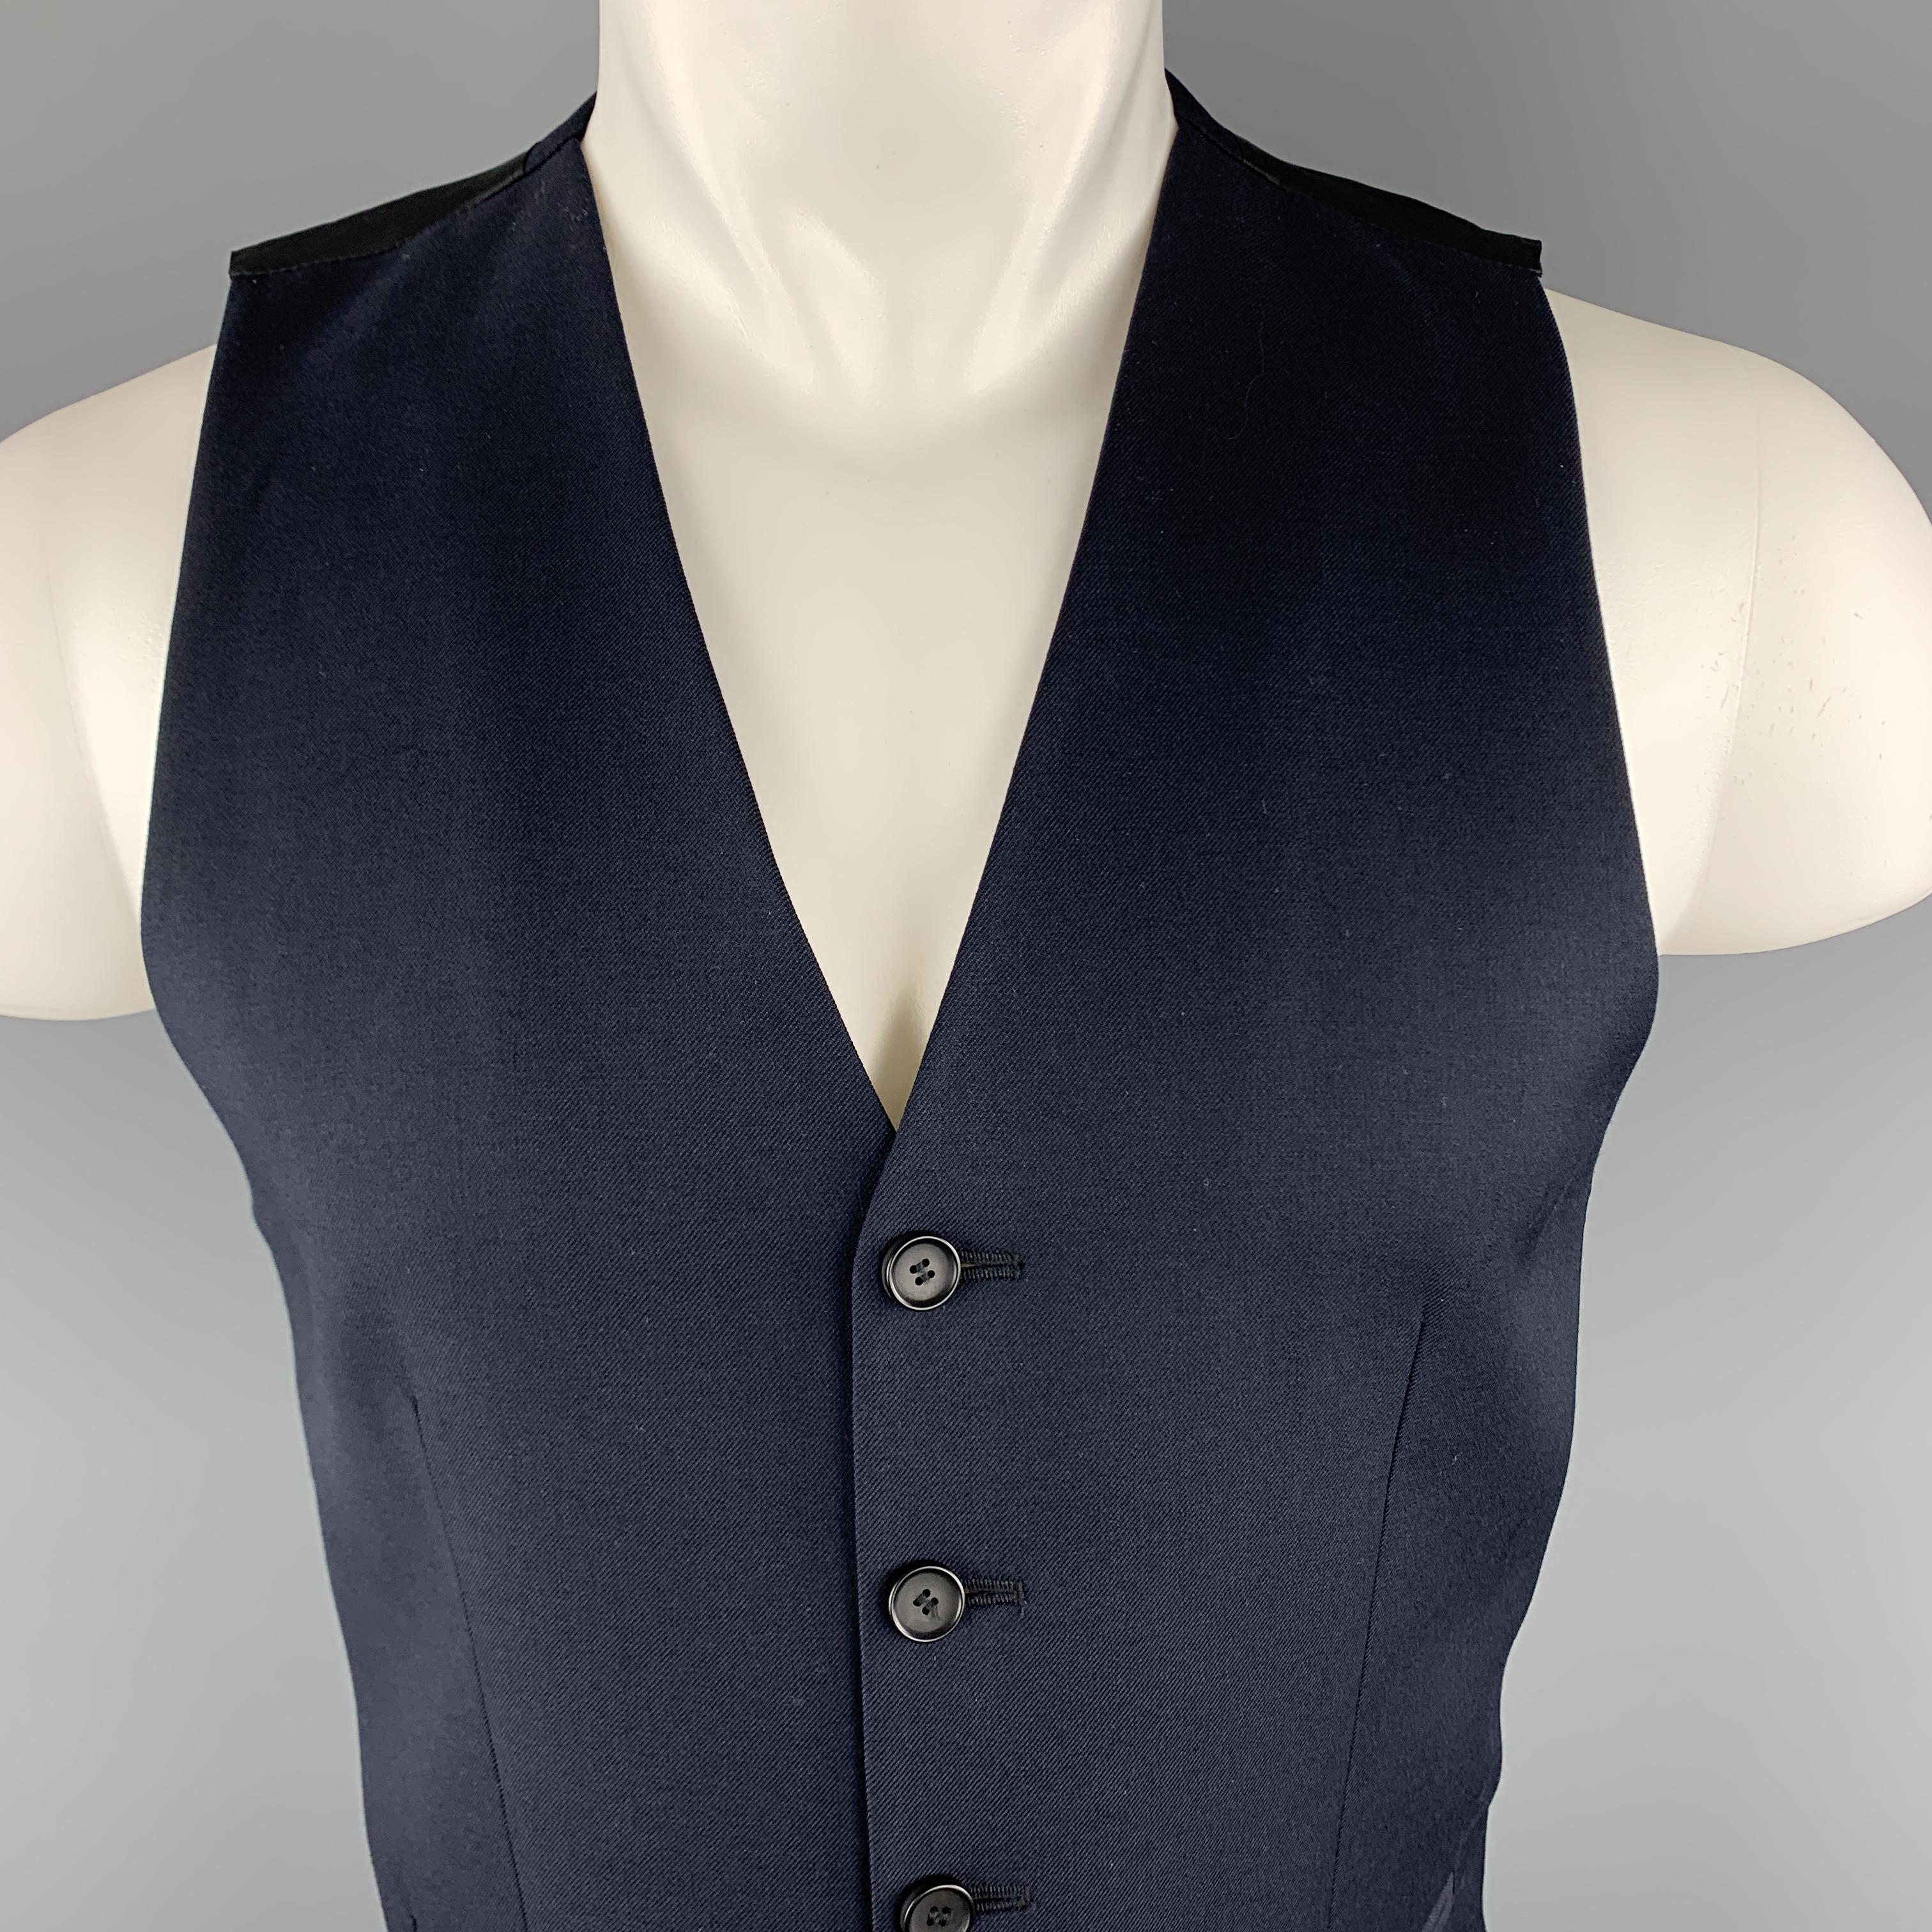 THE KOOPLES dress vest comes in navy blue wool with a black satin back. 

New with Tags.
Marked: IT 46

Measurements:

Shoulder: 12 in.
Chest: 37 in.
Length: 24 in.